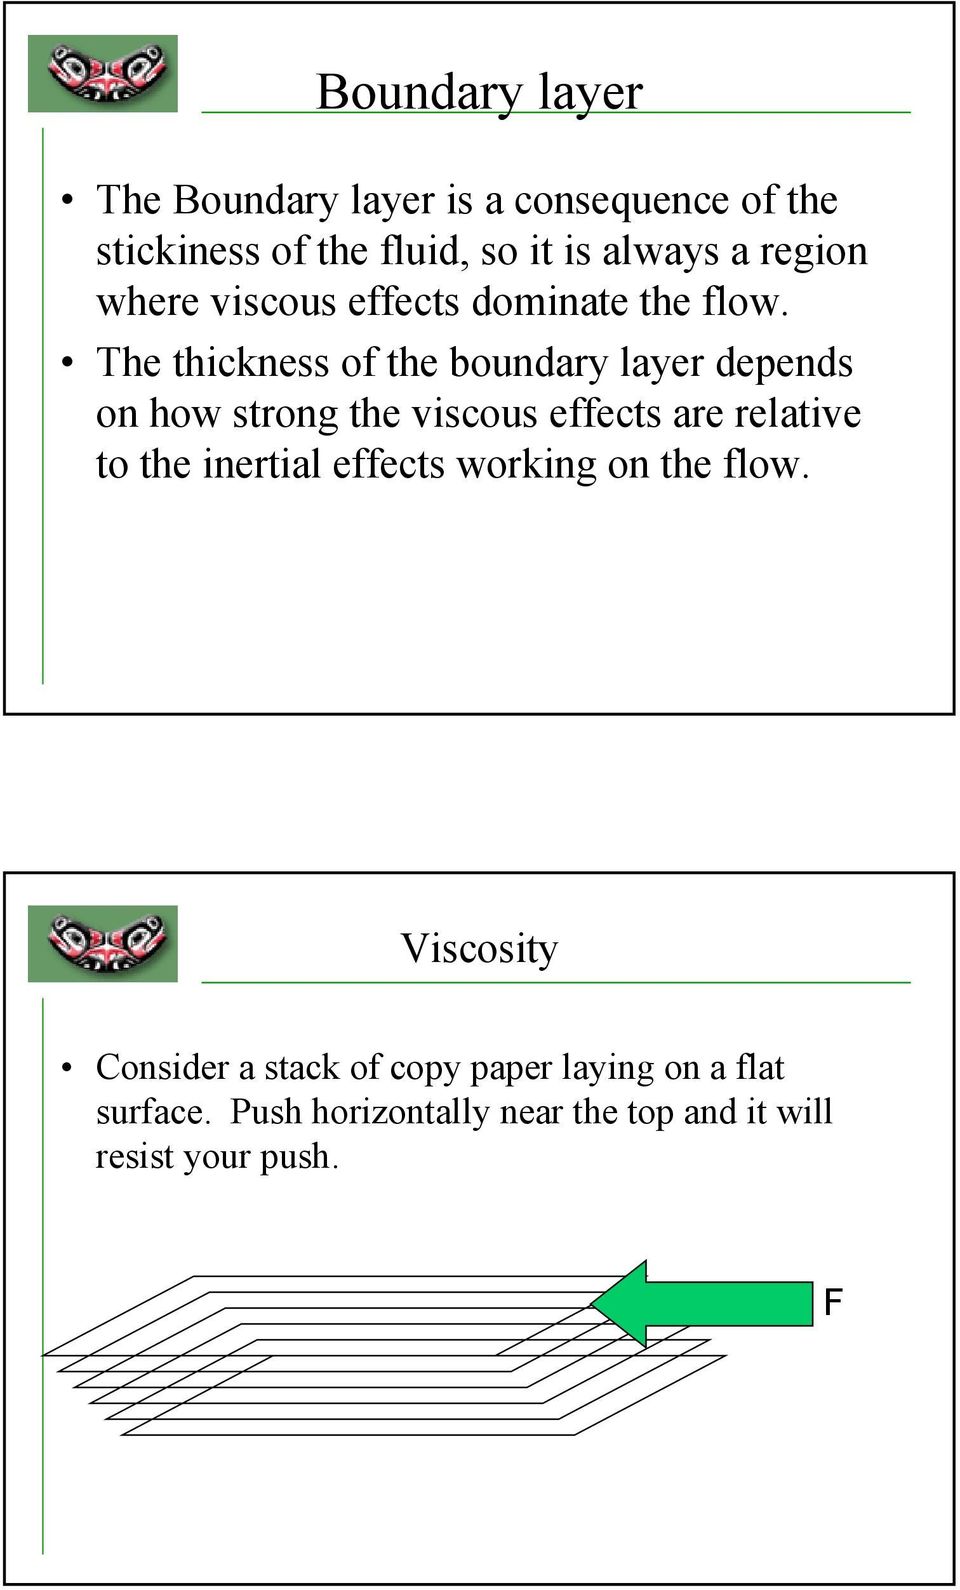 The thickness of the boundary layer depends on how strong the viscous effects are relative to the